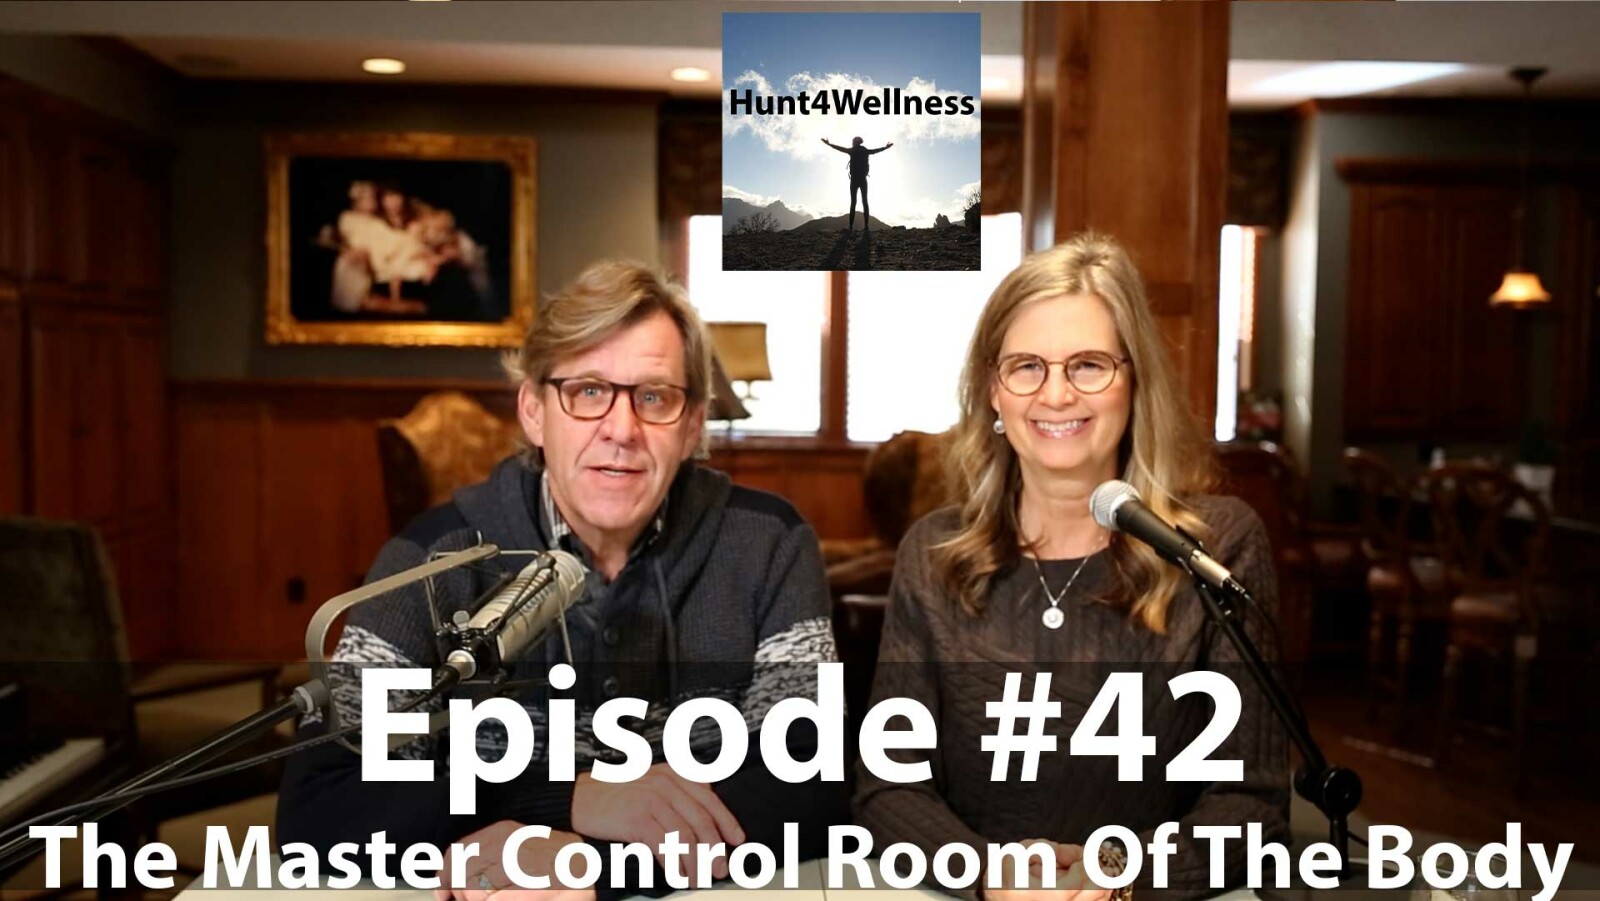 Episode #42 - The Master Control Room Of The Body